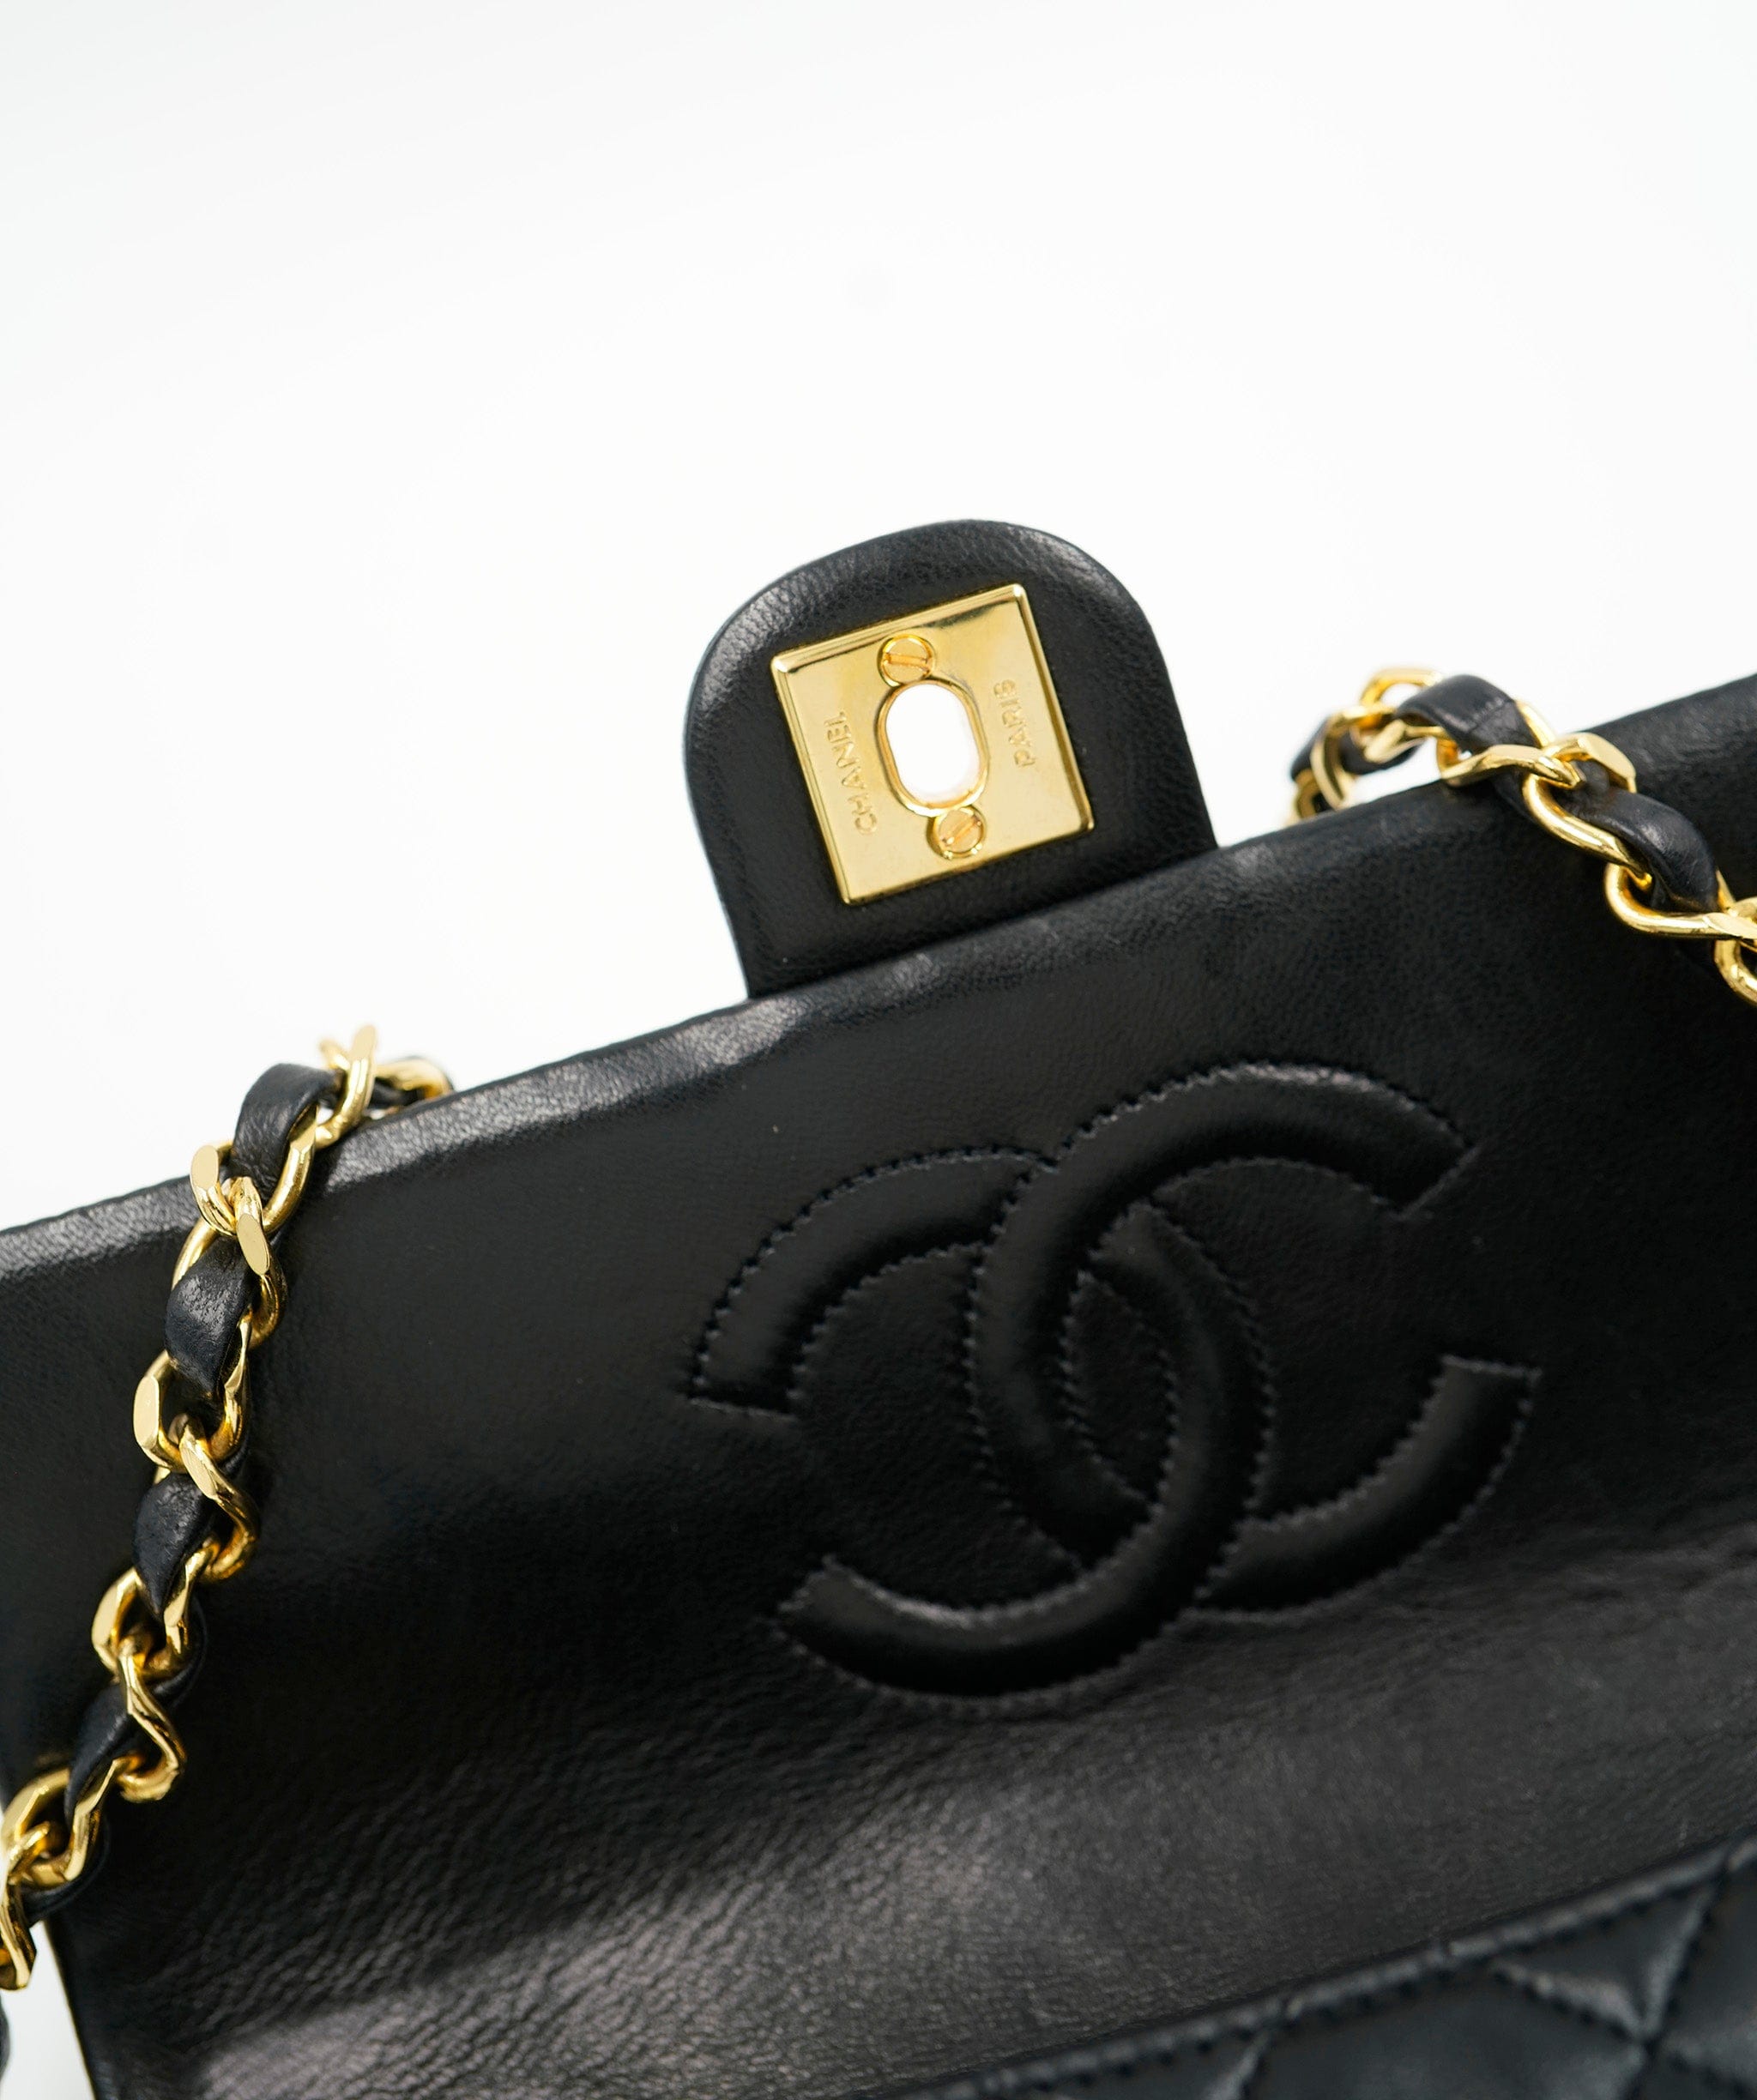 Chanel Chanel 8" Single Flap bag in Black Lambskin with GHW - AWL4074